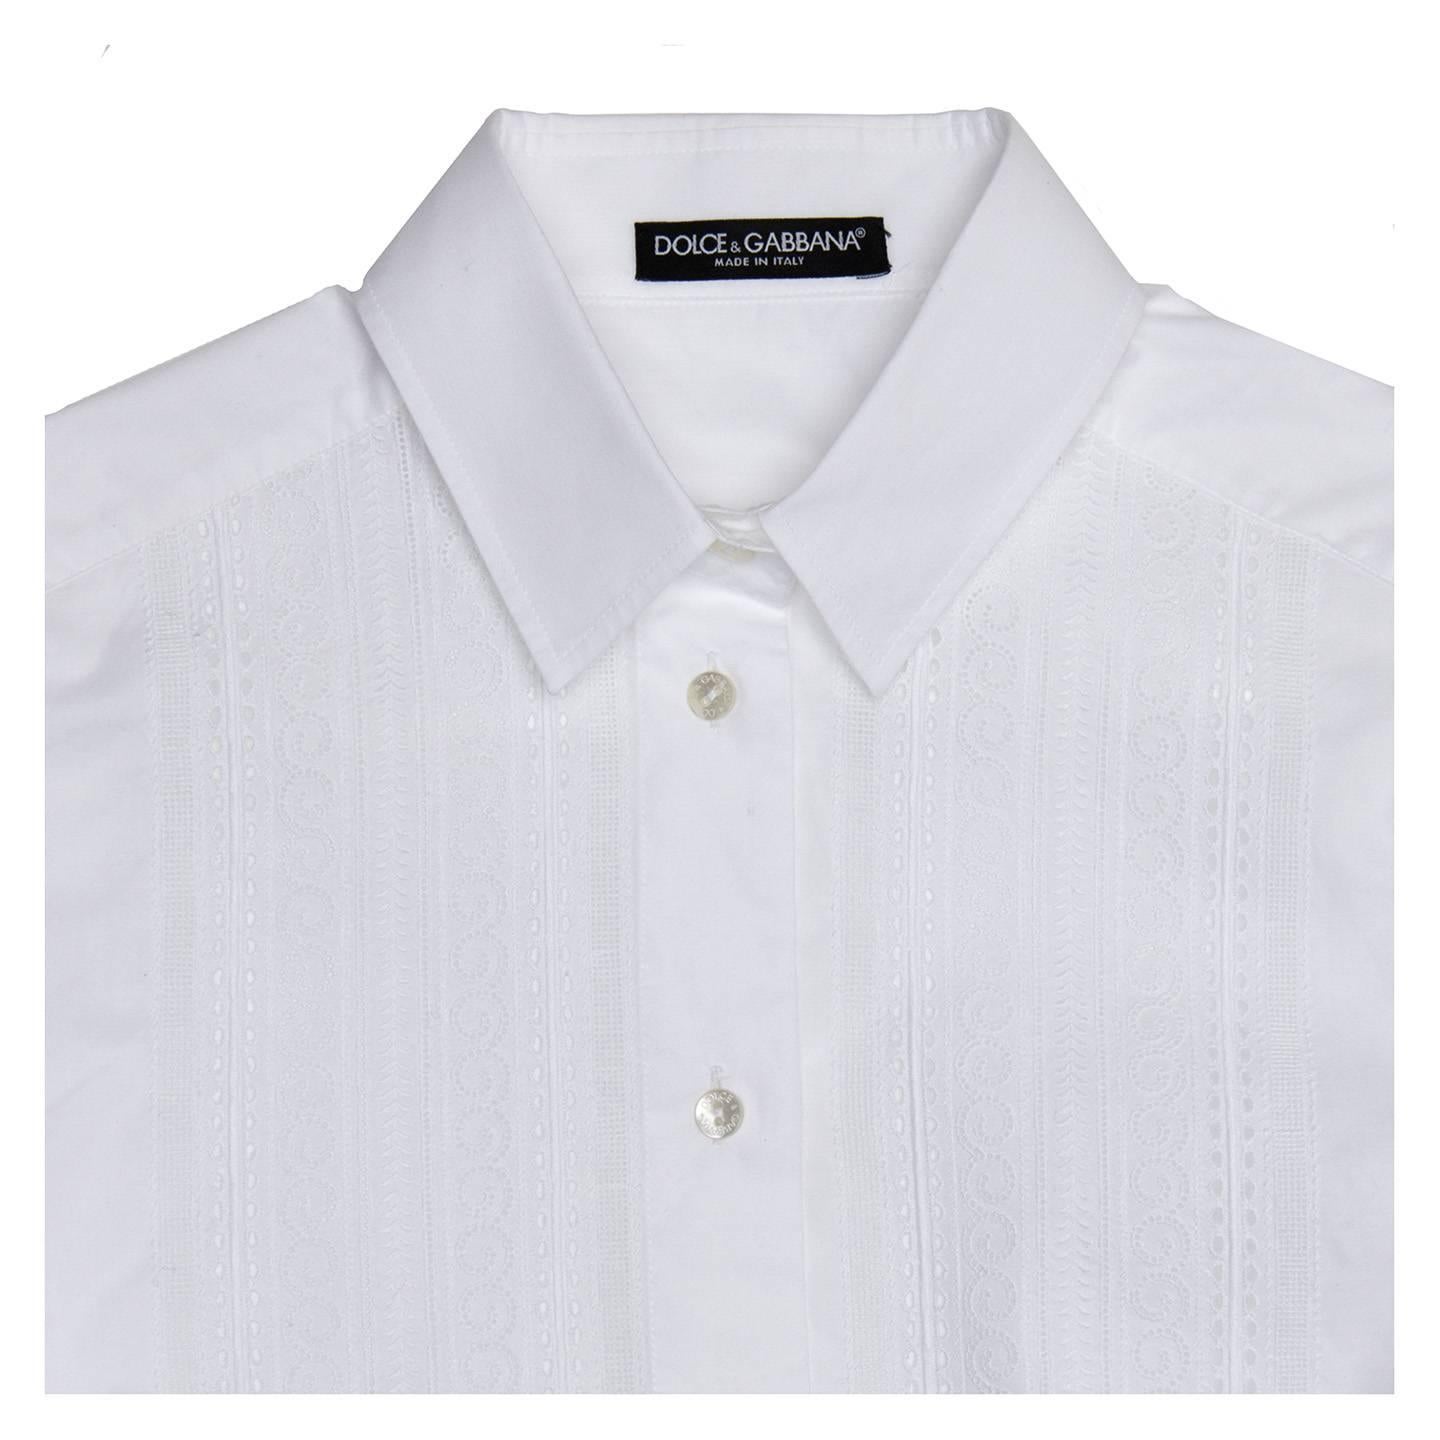 Dolce & Gabbana White Cotton & Lace Shirt In New Condition For Sale In Brooklyn, NY